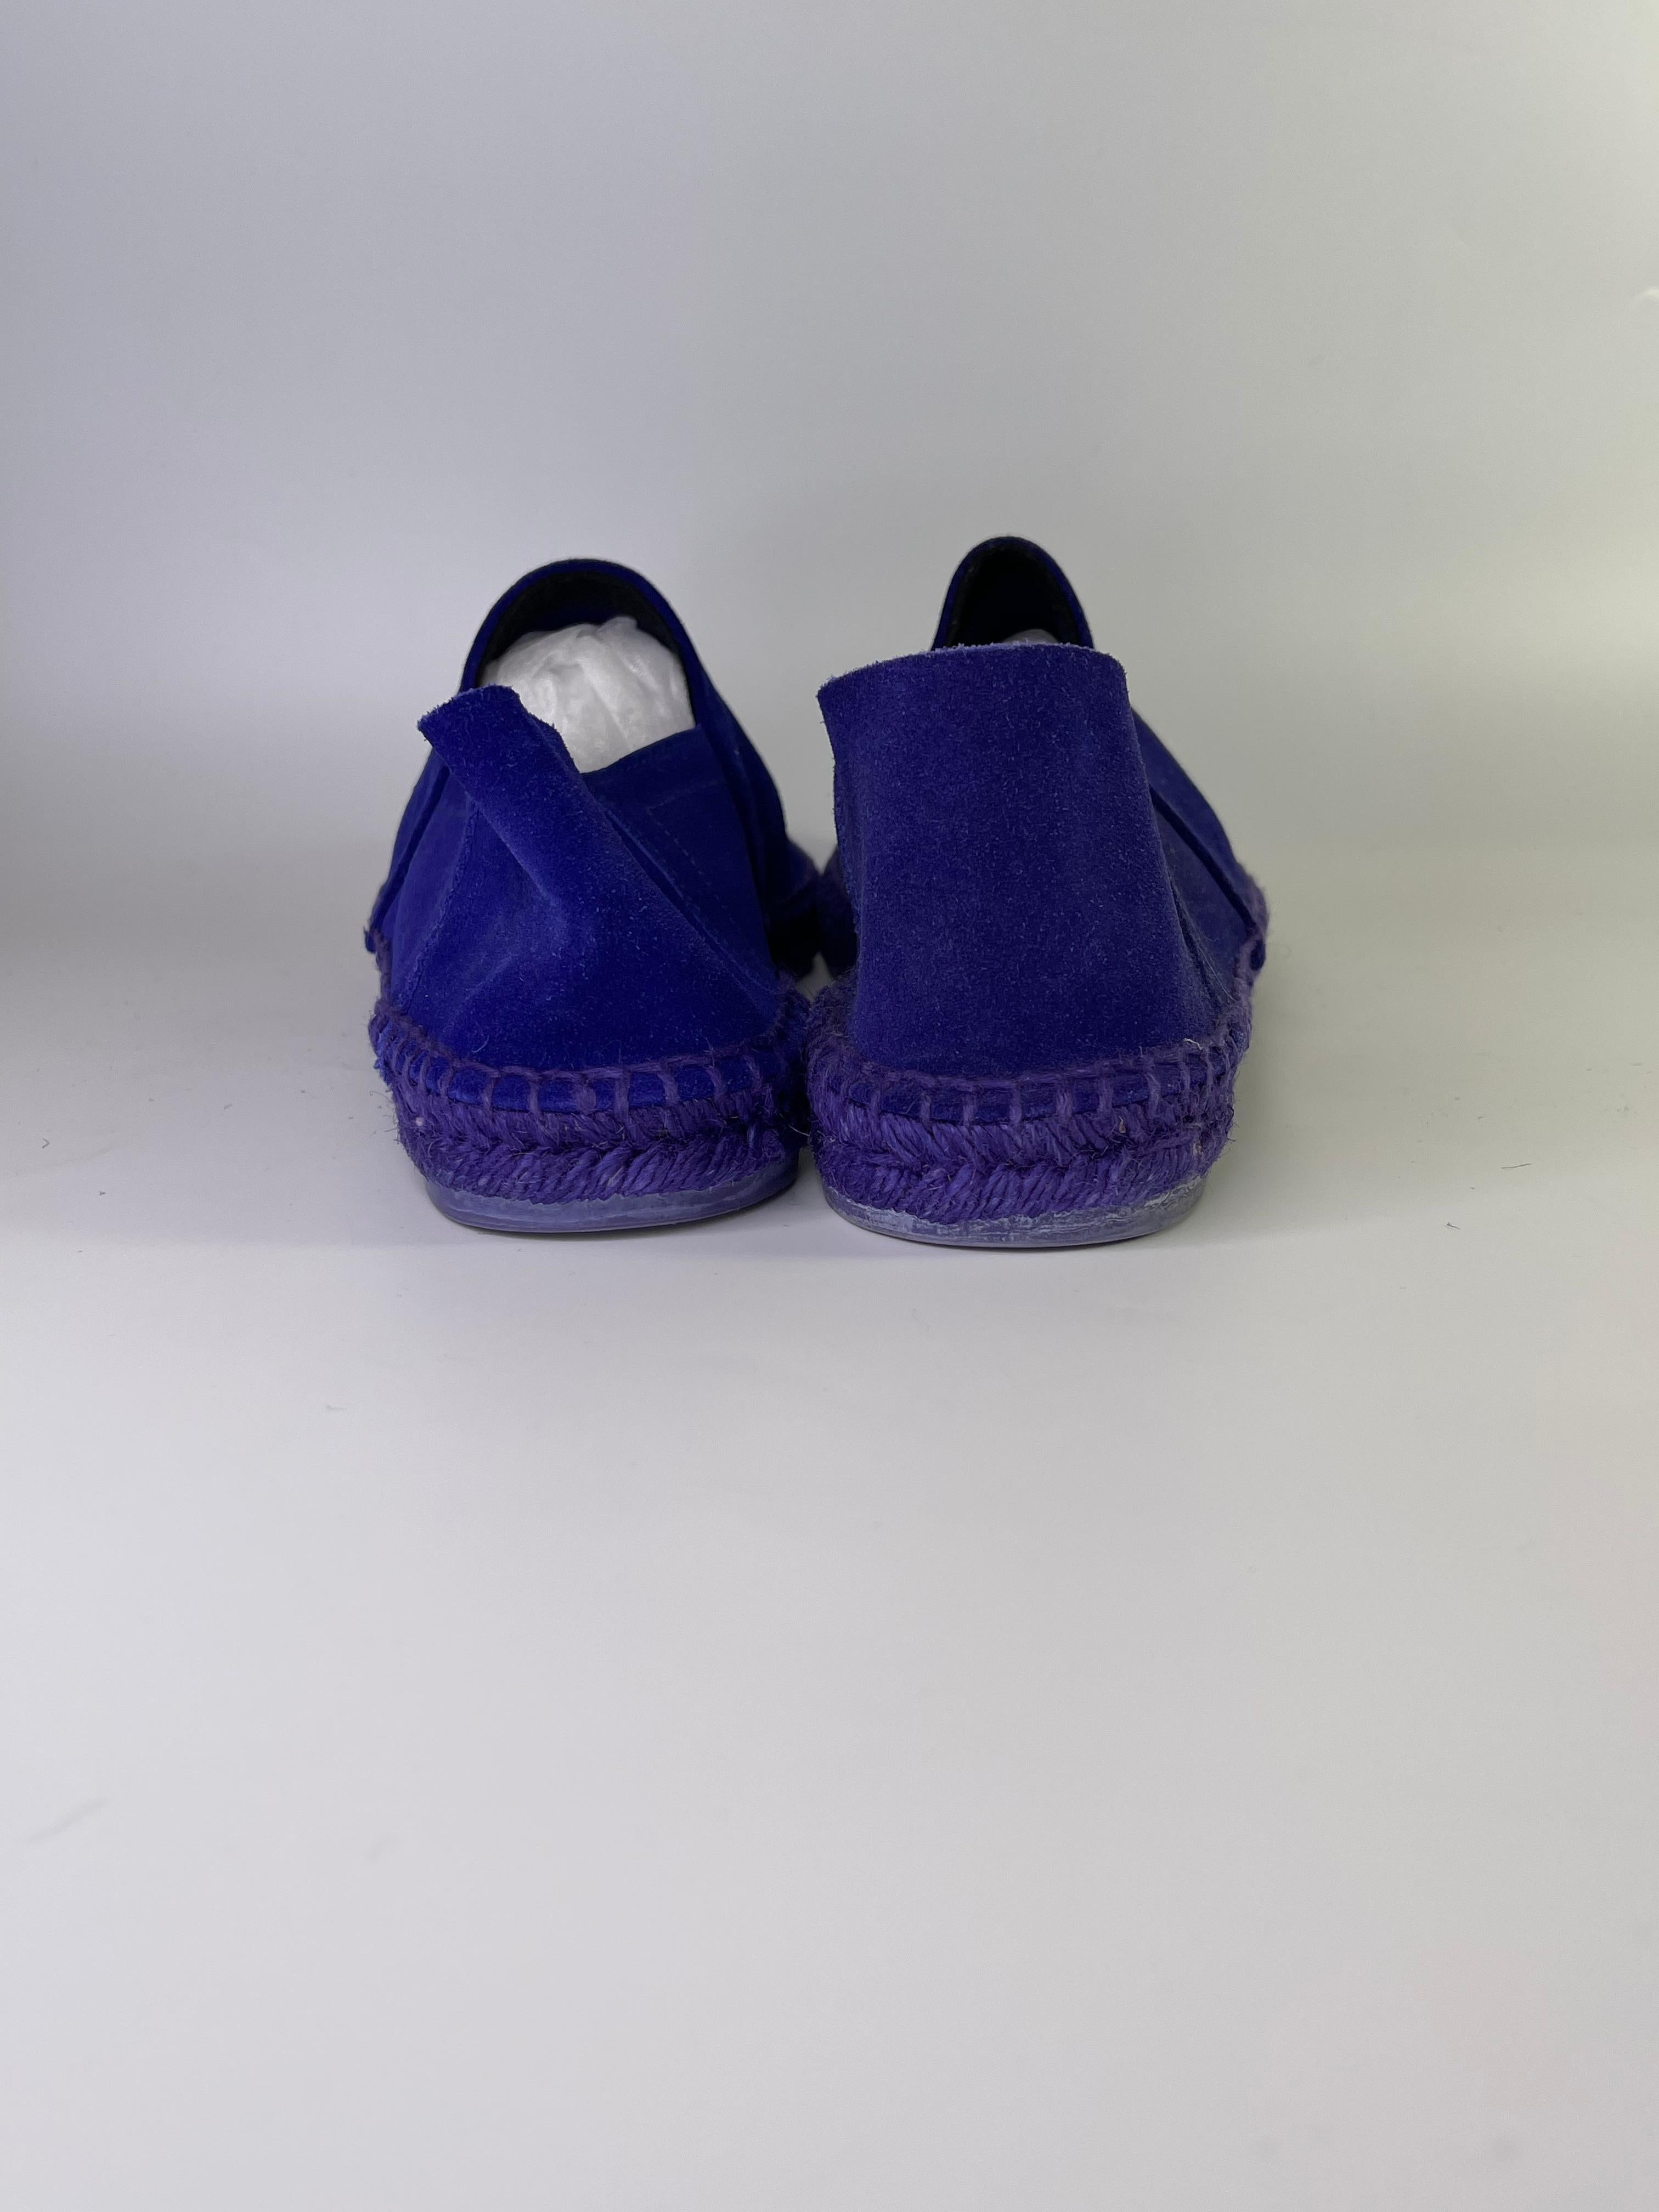 mens purple suede loafers